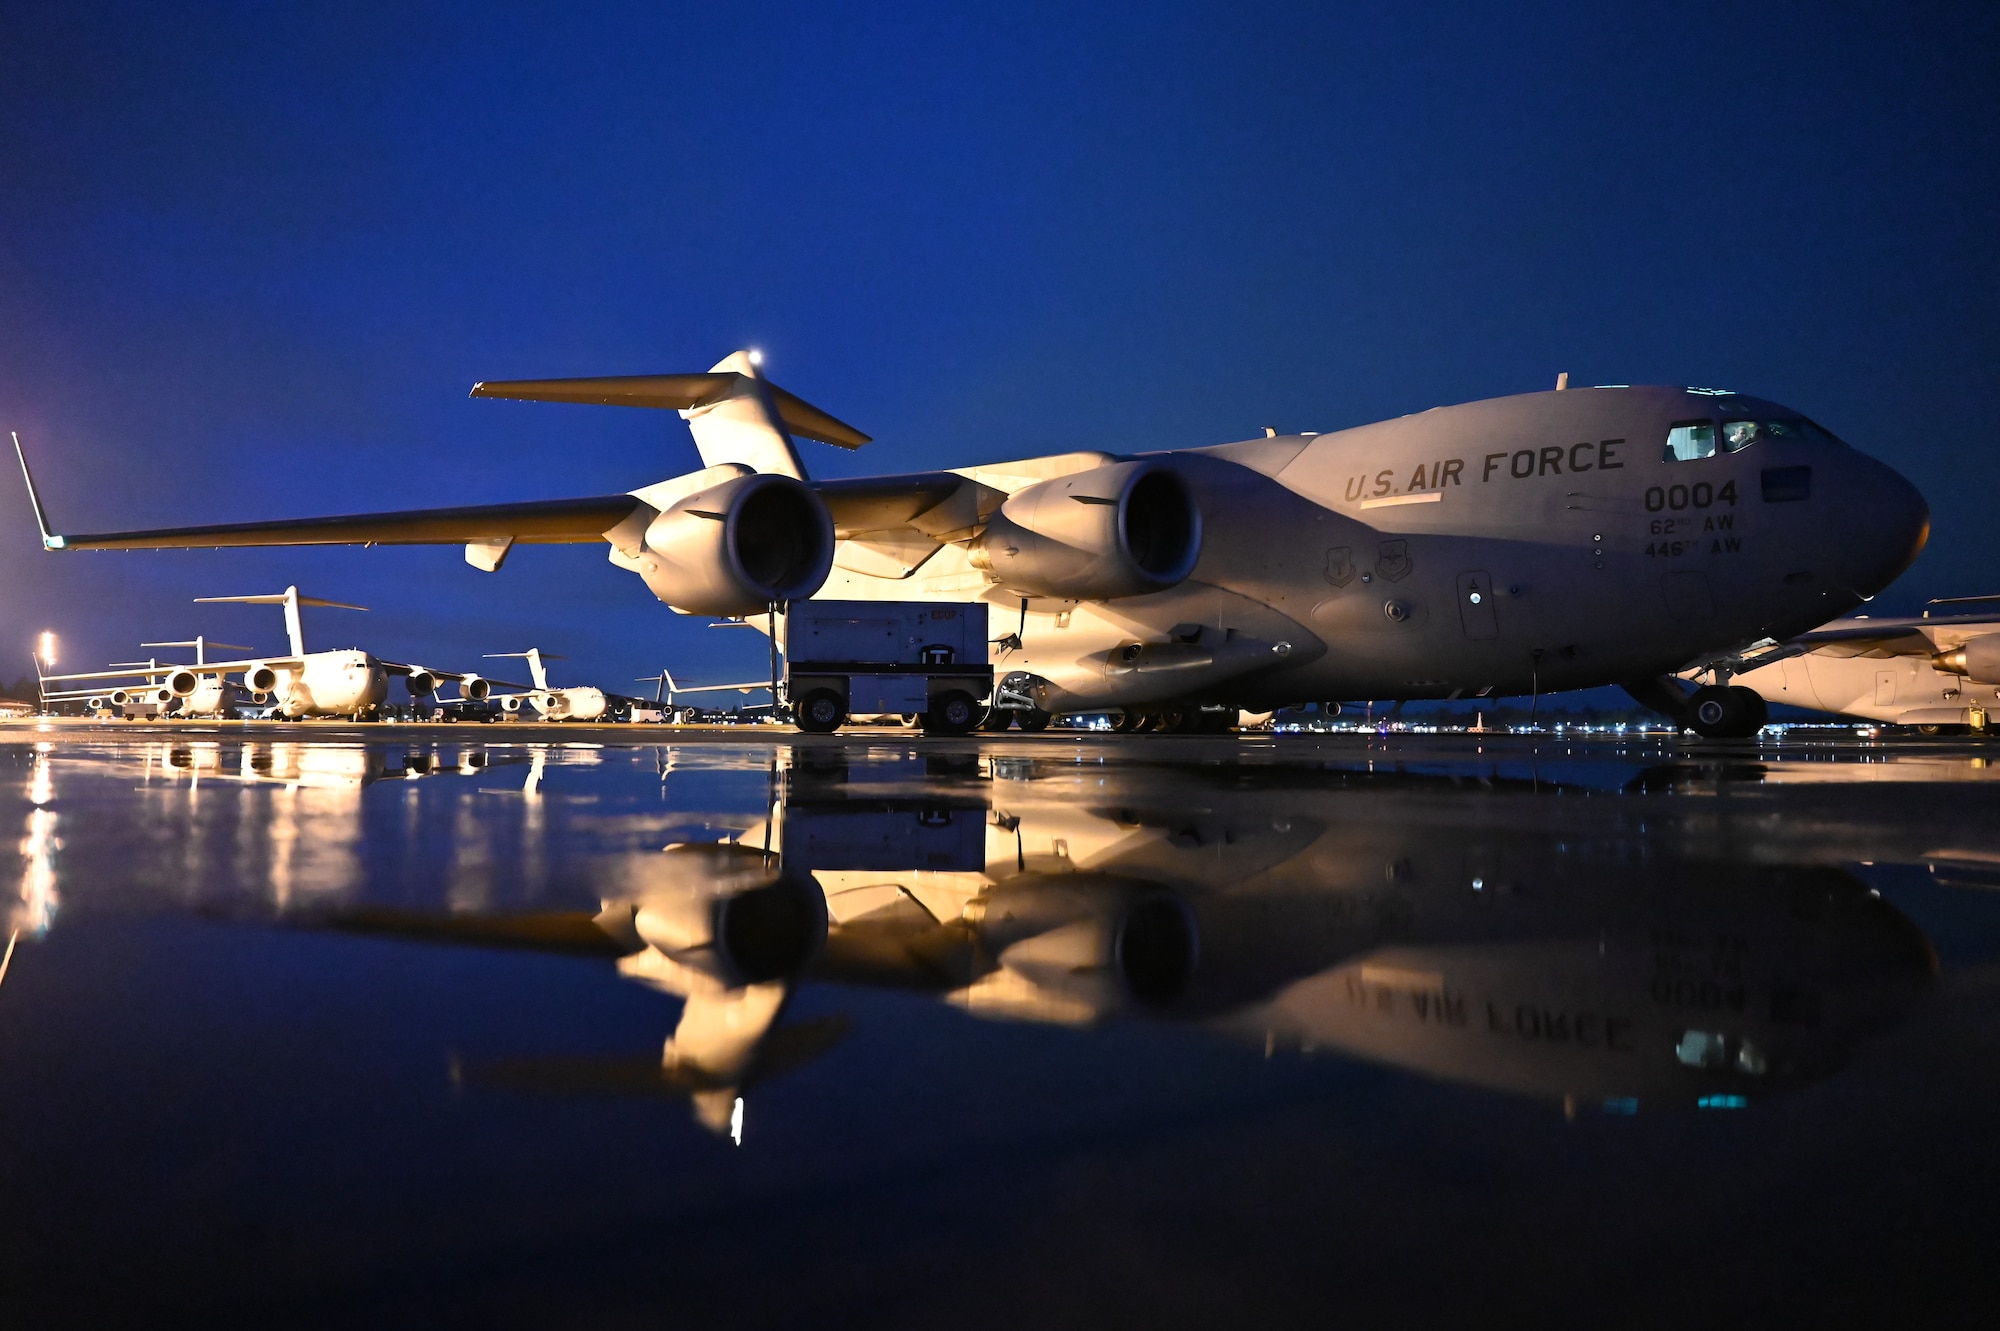 A C-17 Globemaster III sits on the flight prior to a night-time airlift mission as part of Exercise Rainier War 21B at Joint Base Lewis-McChord, Washington, Nov. 6, 2021. The exercise is designed to demonstrate the wing’s ability to operate and survive while defeating challenges to the U.S. military advantage in all operating domains – air, land, sea and cyberspace. (U.S. Air Force photo by Master Sgt. Julius Delos Reyes)